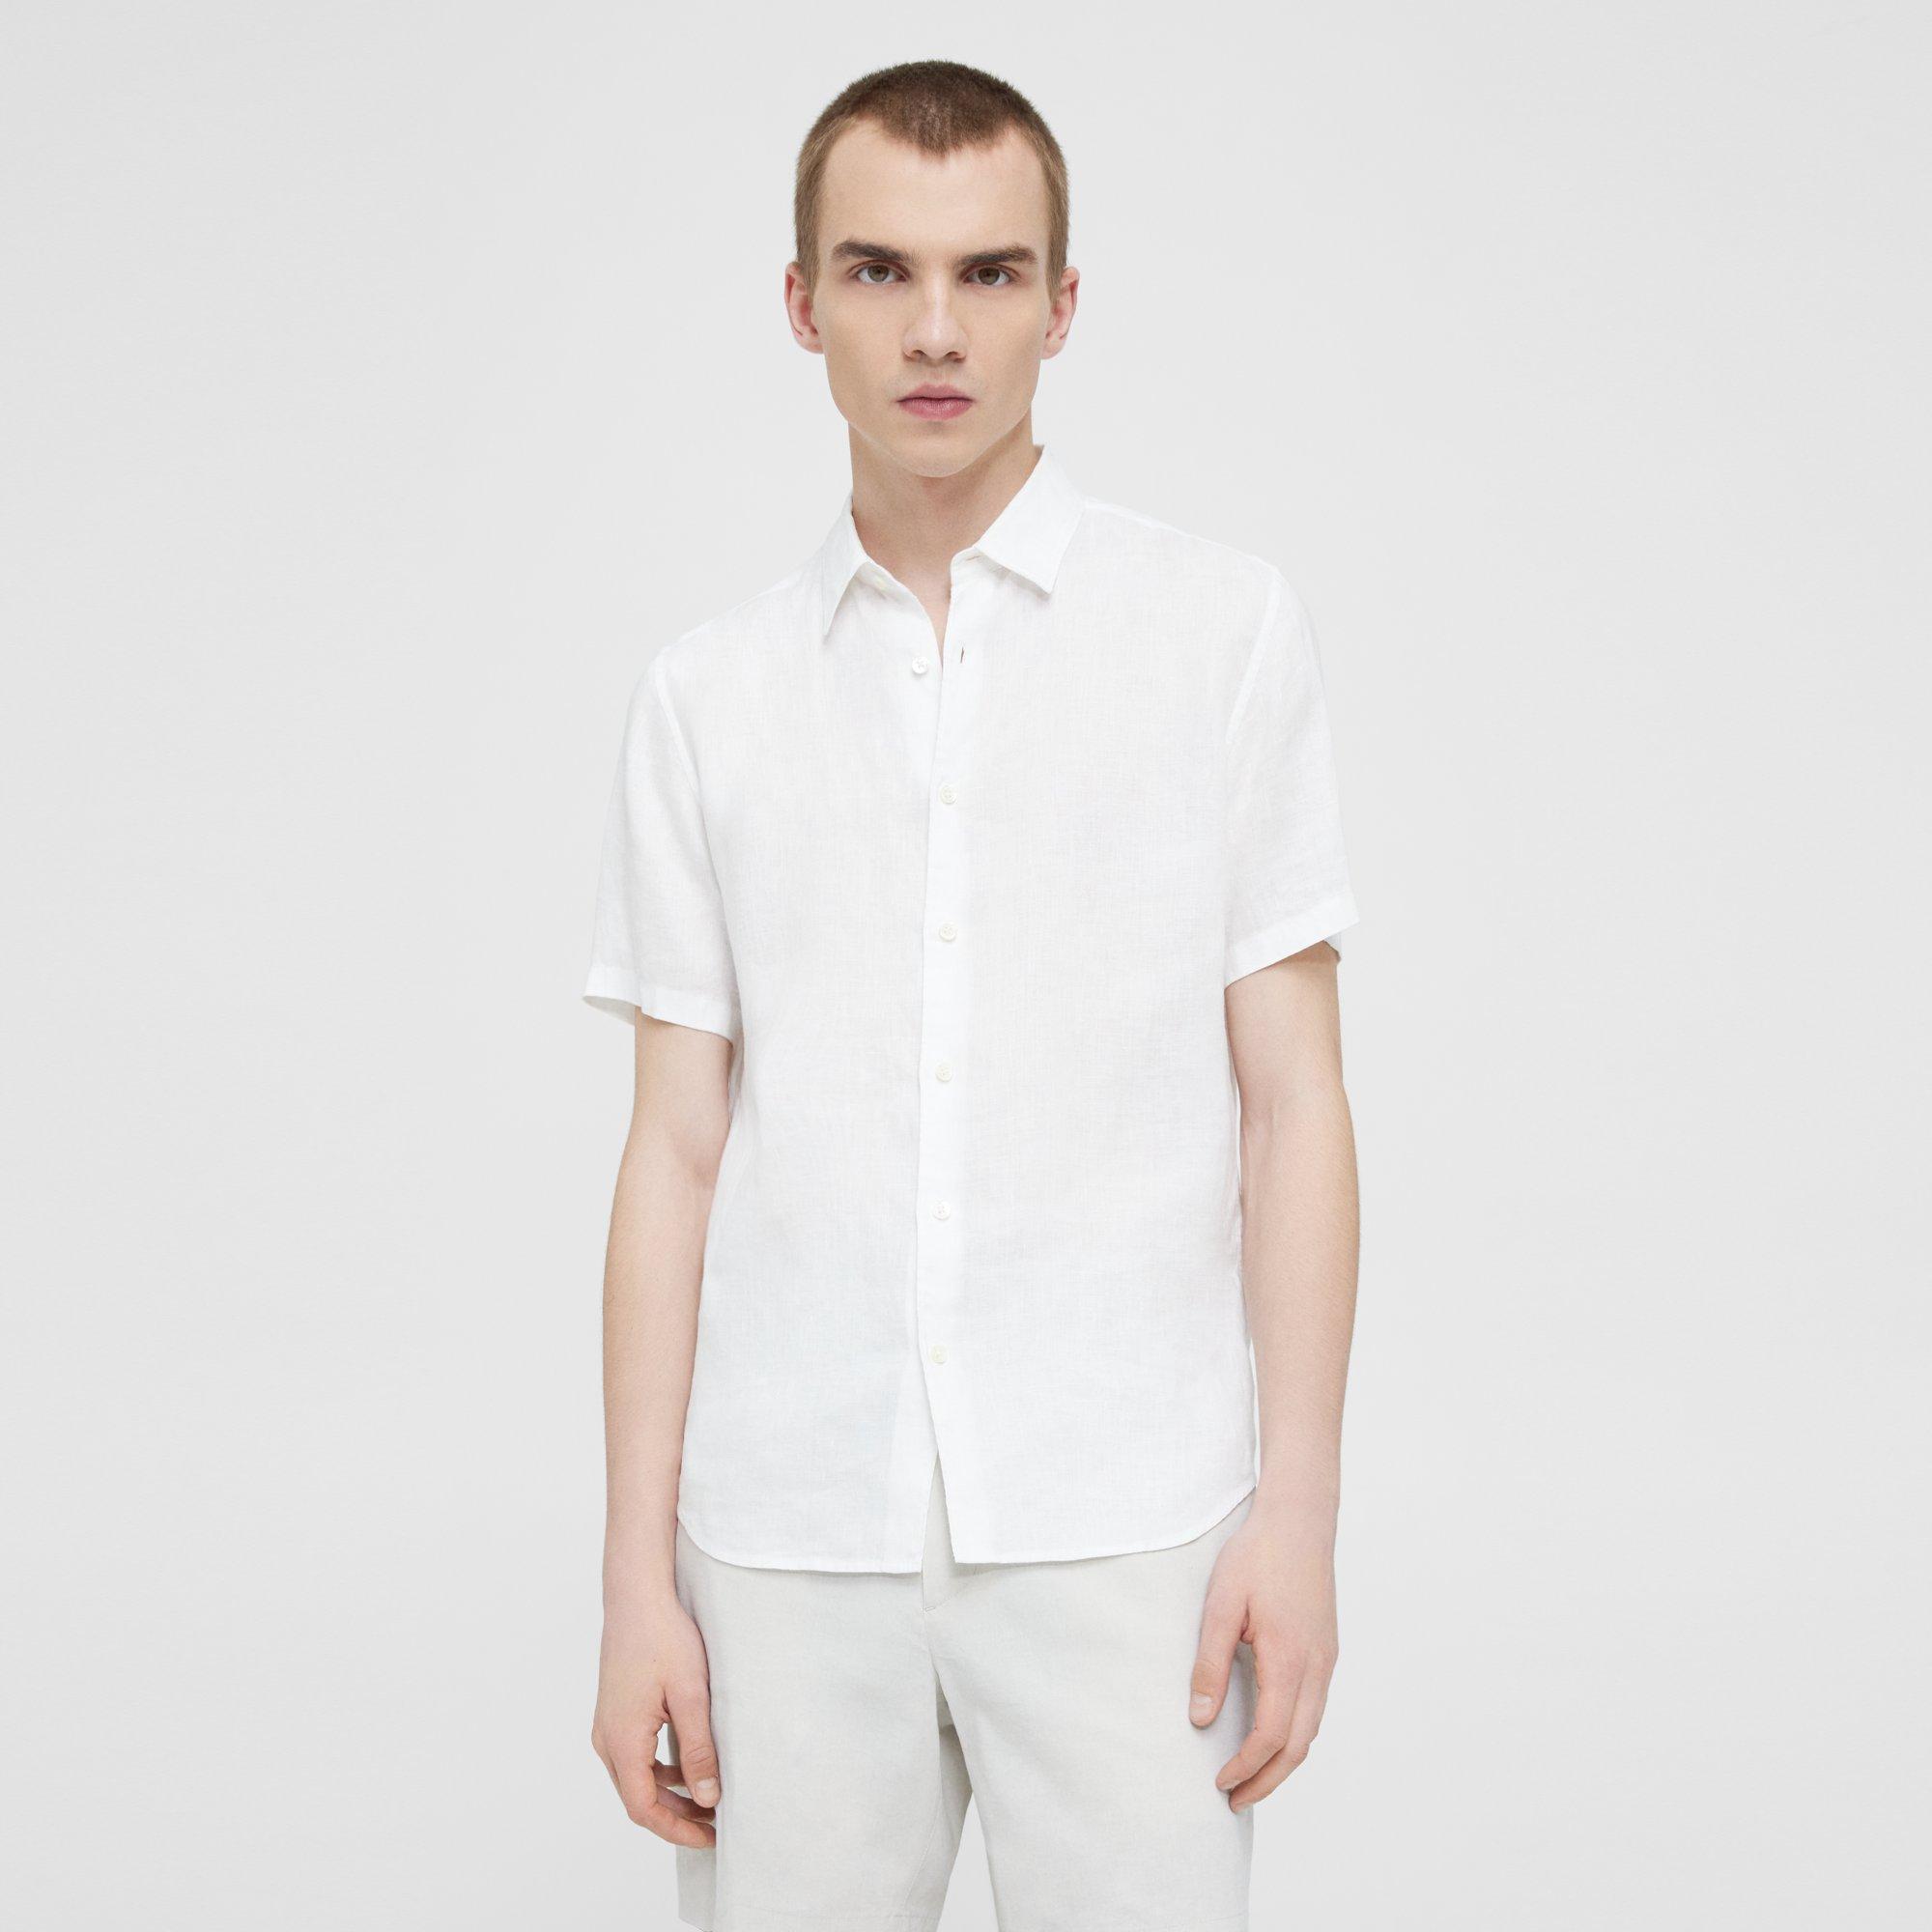 Theory Irving Short-Sleeve Shirt in Relaxed Linen